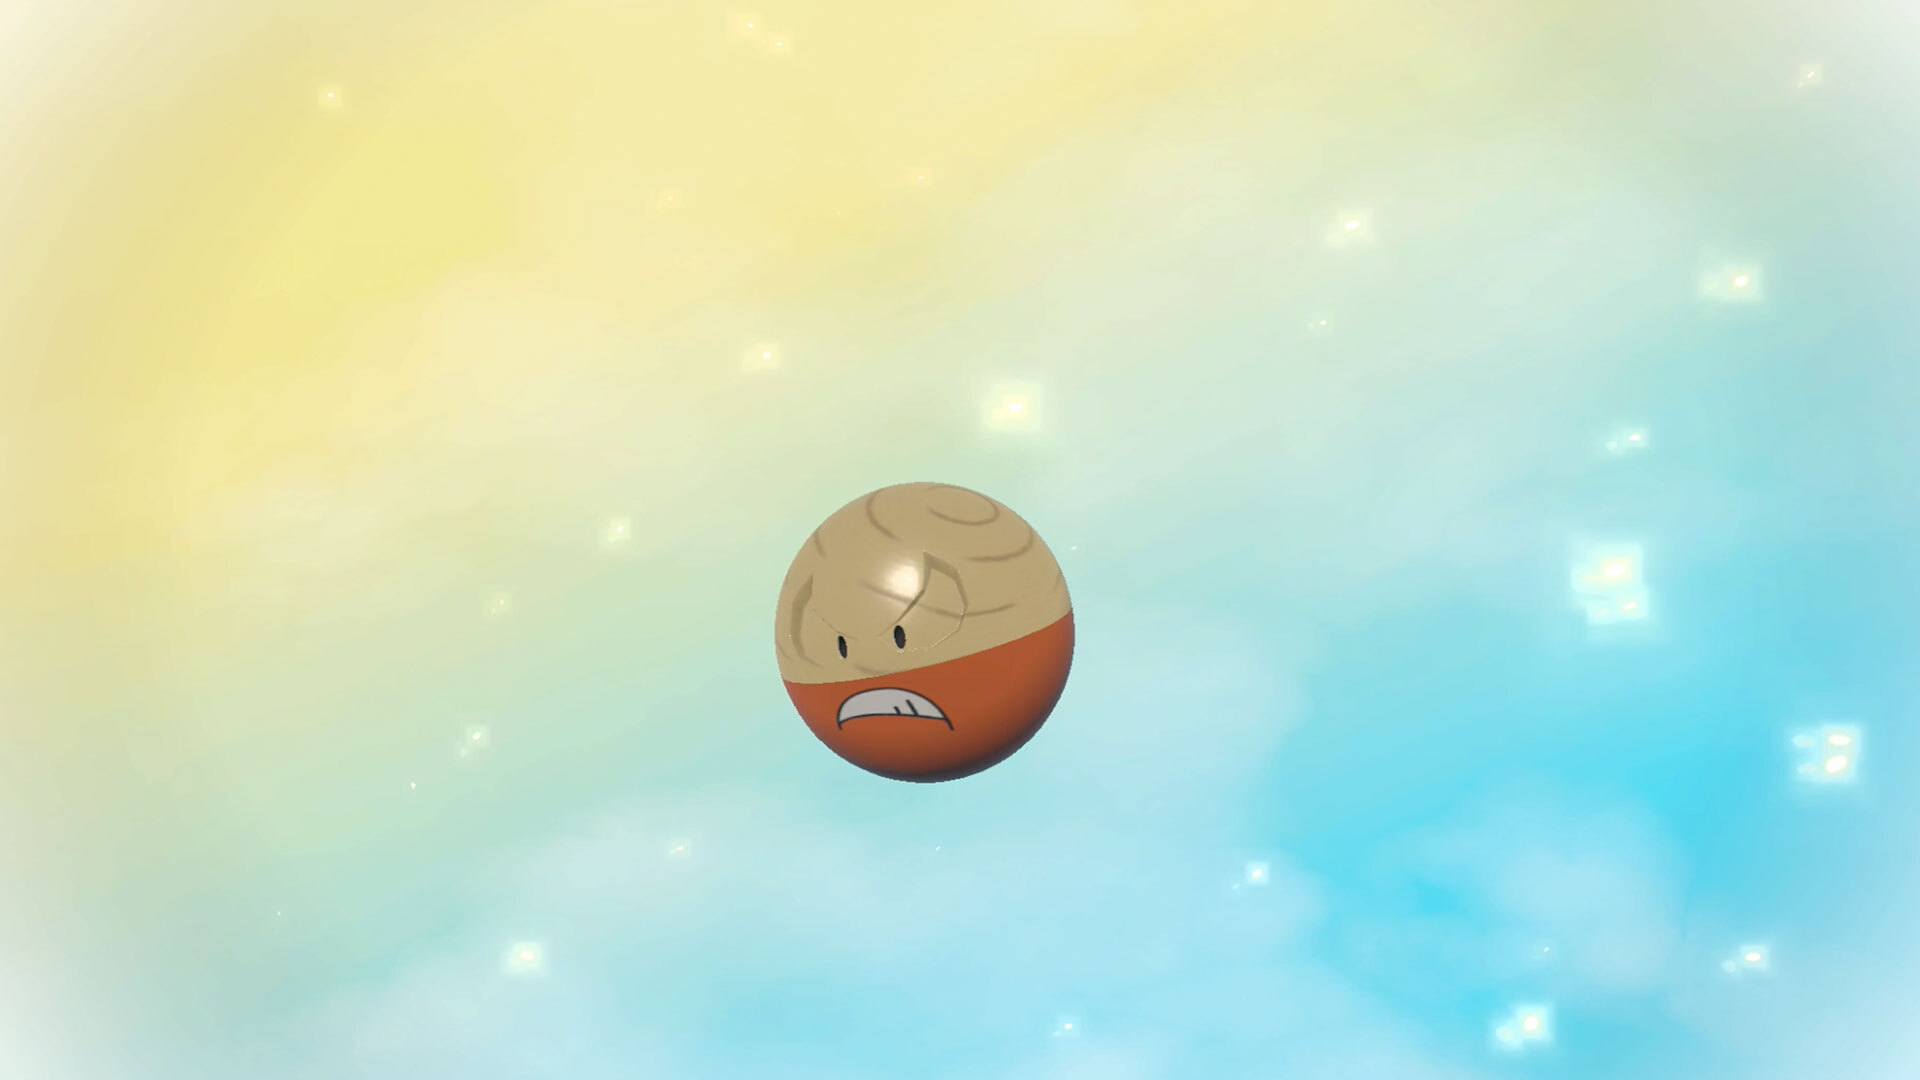 How to evolve Hisuian Voltorb into Electrode in Pokemon Legends: Arceus